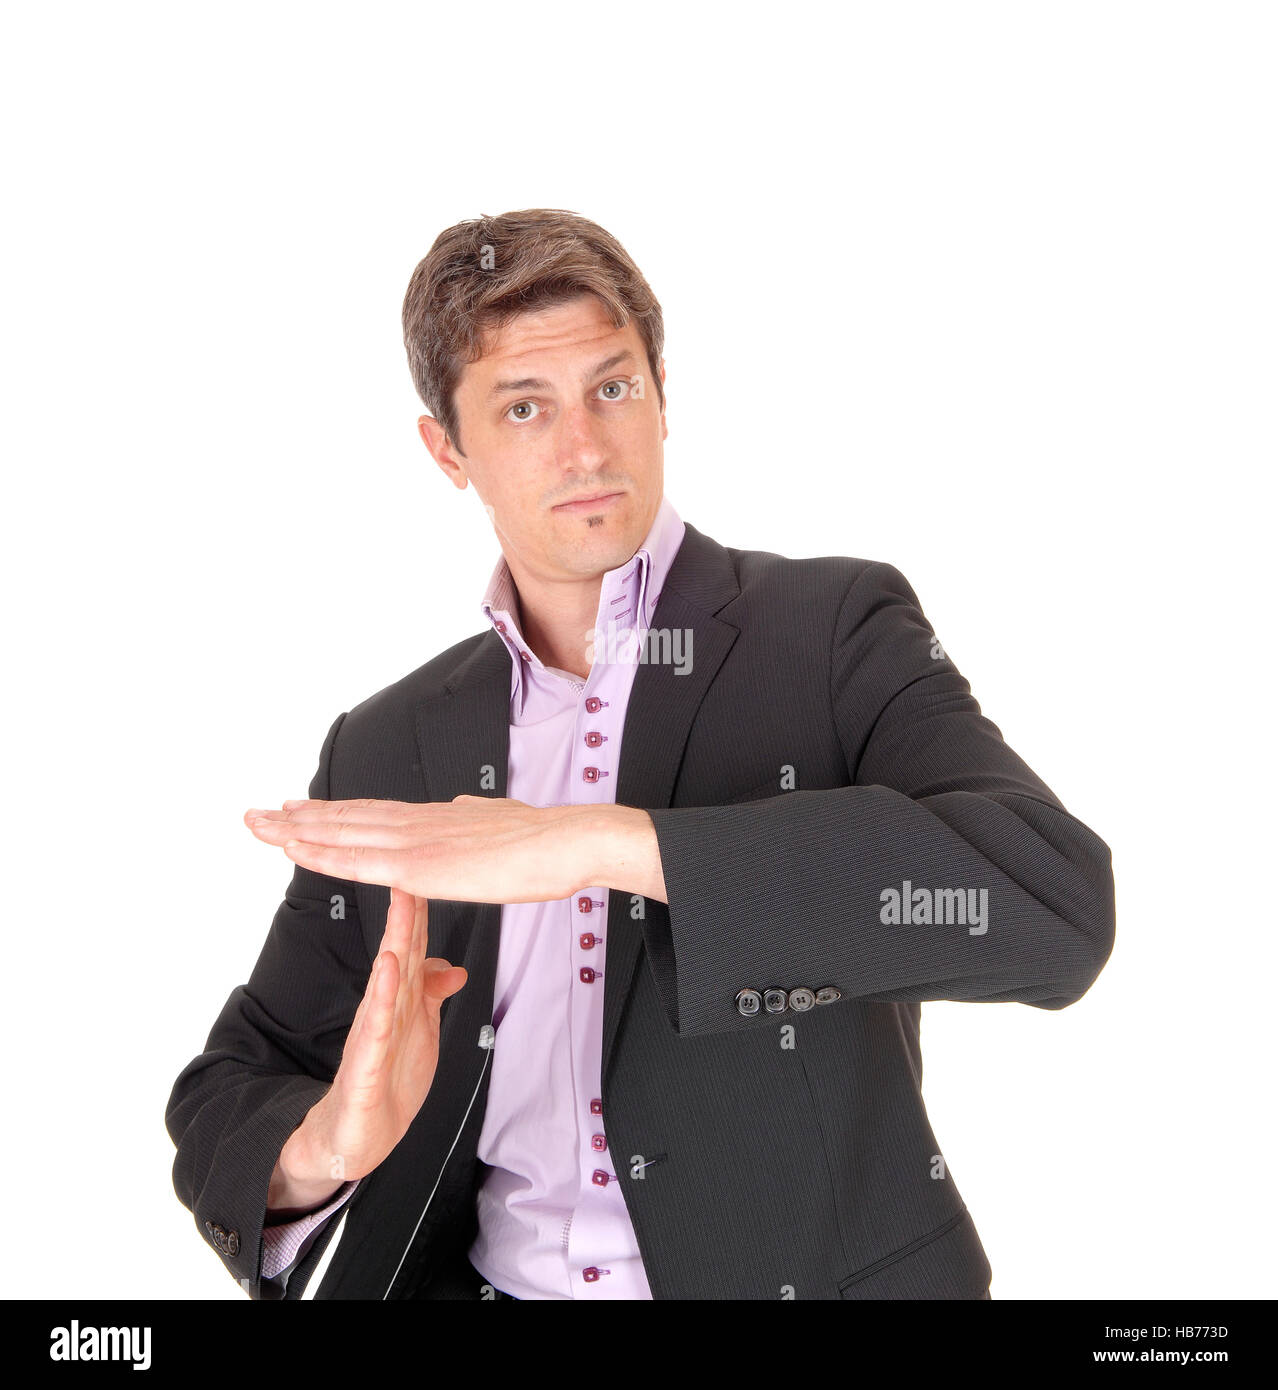 Business man gesturing, lets talk. Stock Photo